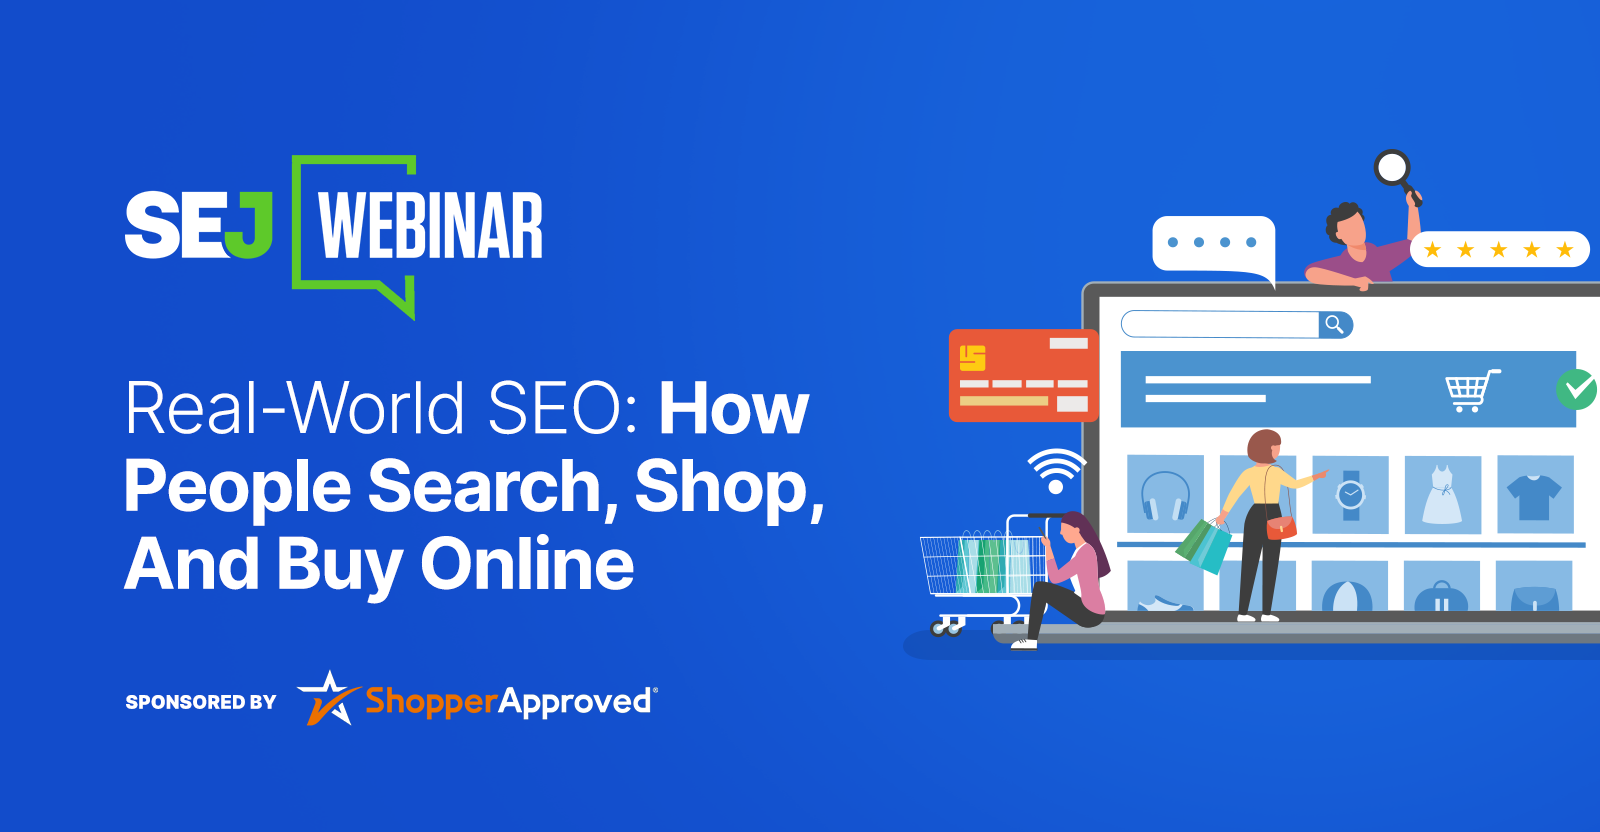 How Do Buyers Really Search, Shop & Buy Online? [Webinar]